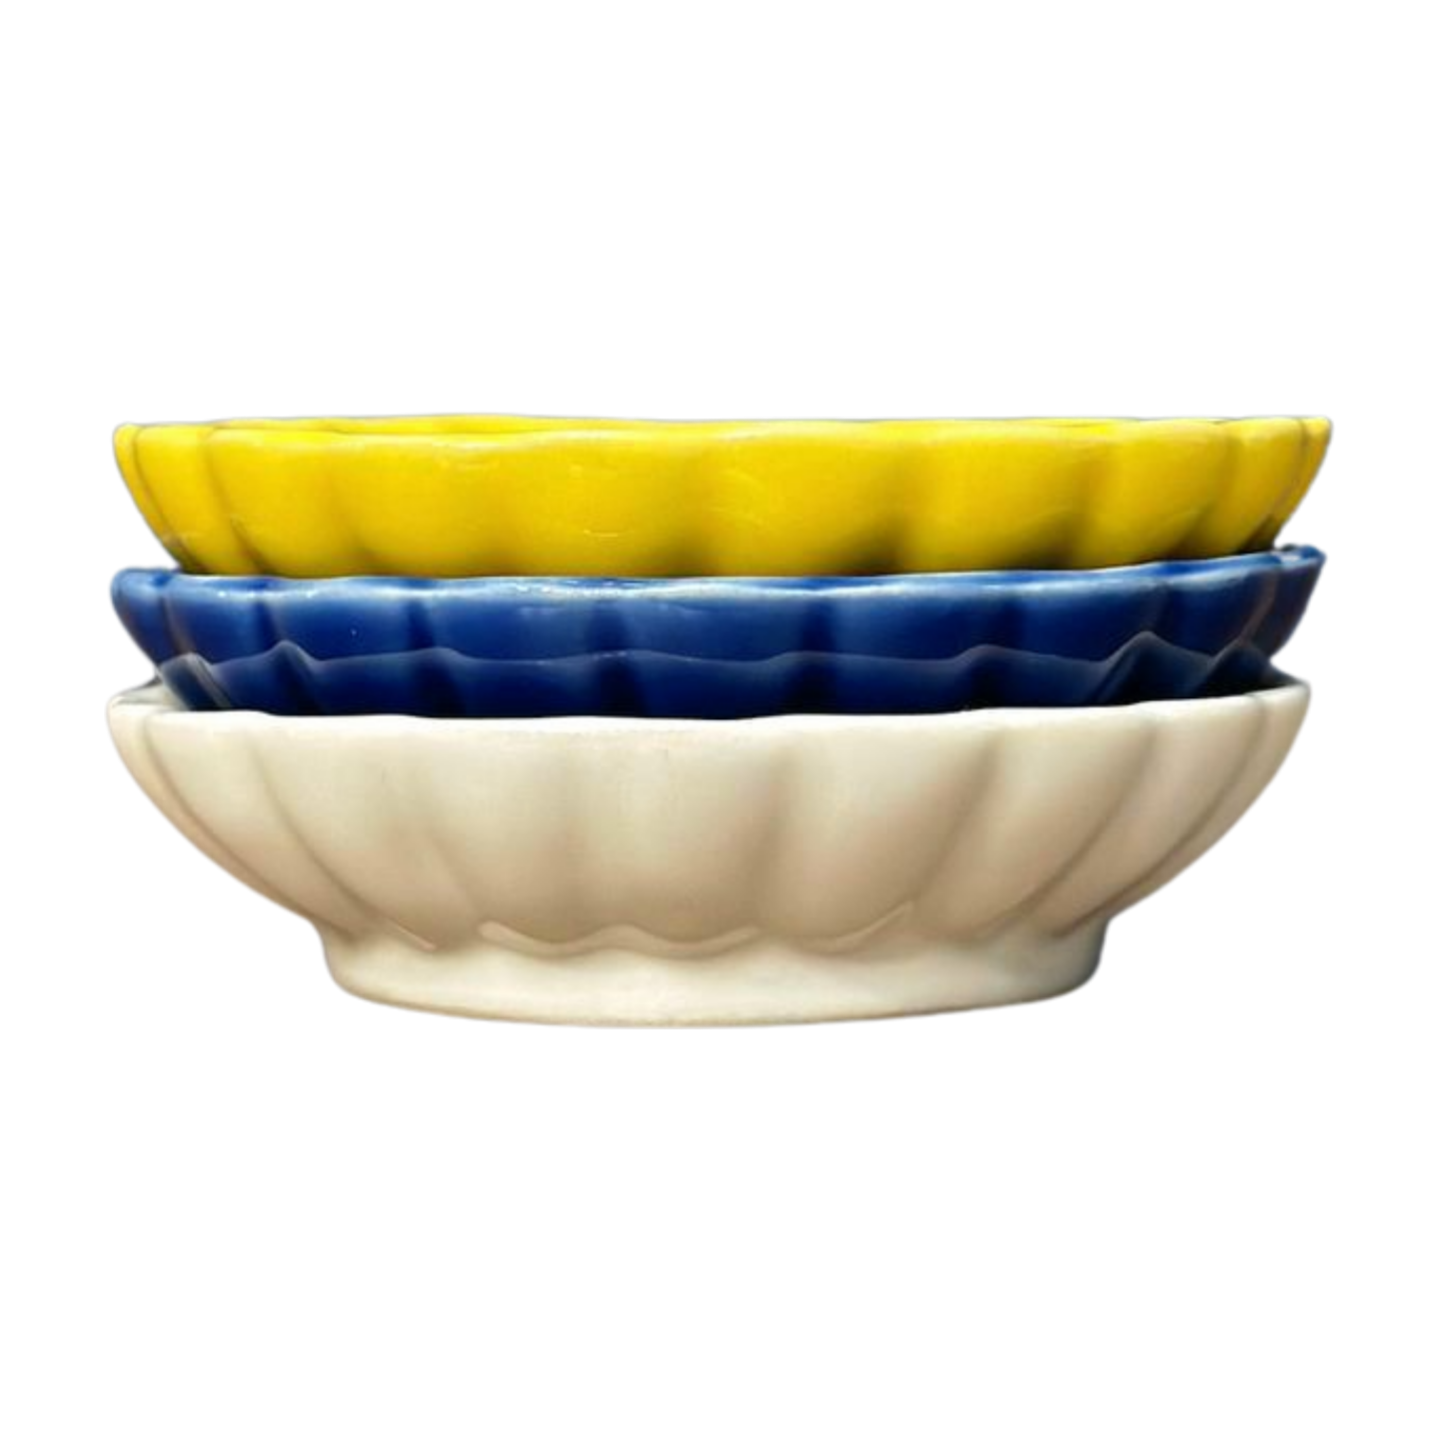 Set of three Japanese Sauce Plates in blue, yellow, and white. Pictured here stacked.